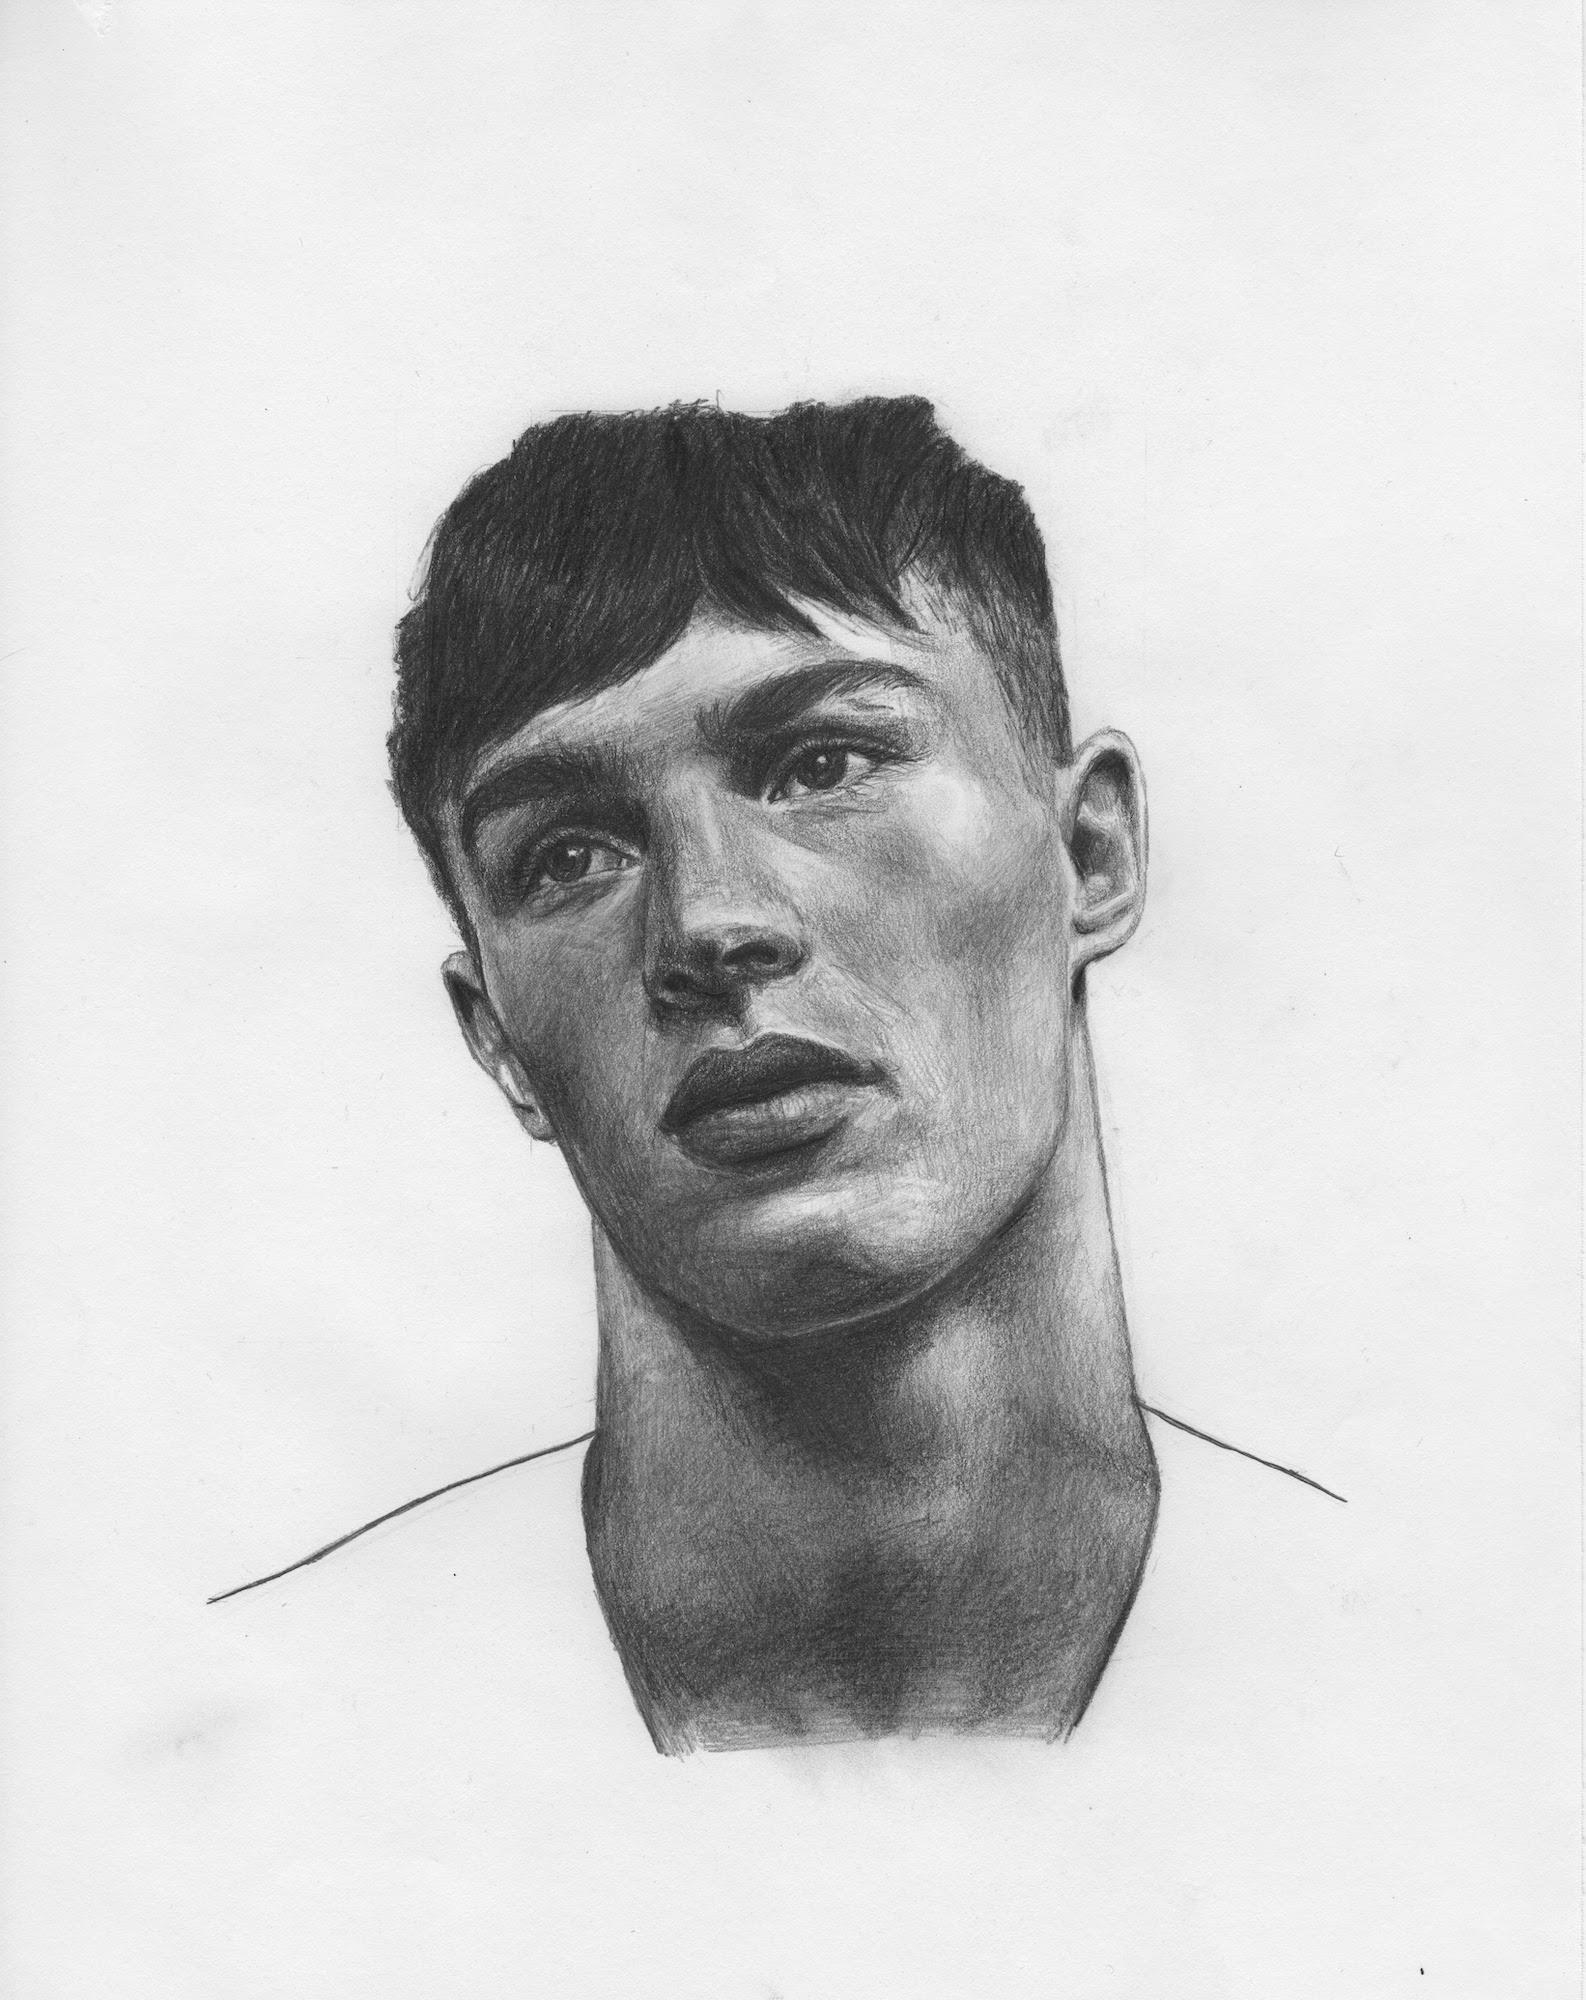 Pencil portrait drawing of a man looking unimpressed